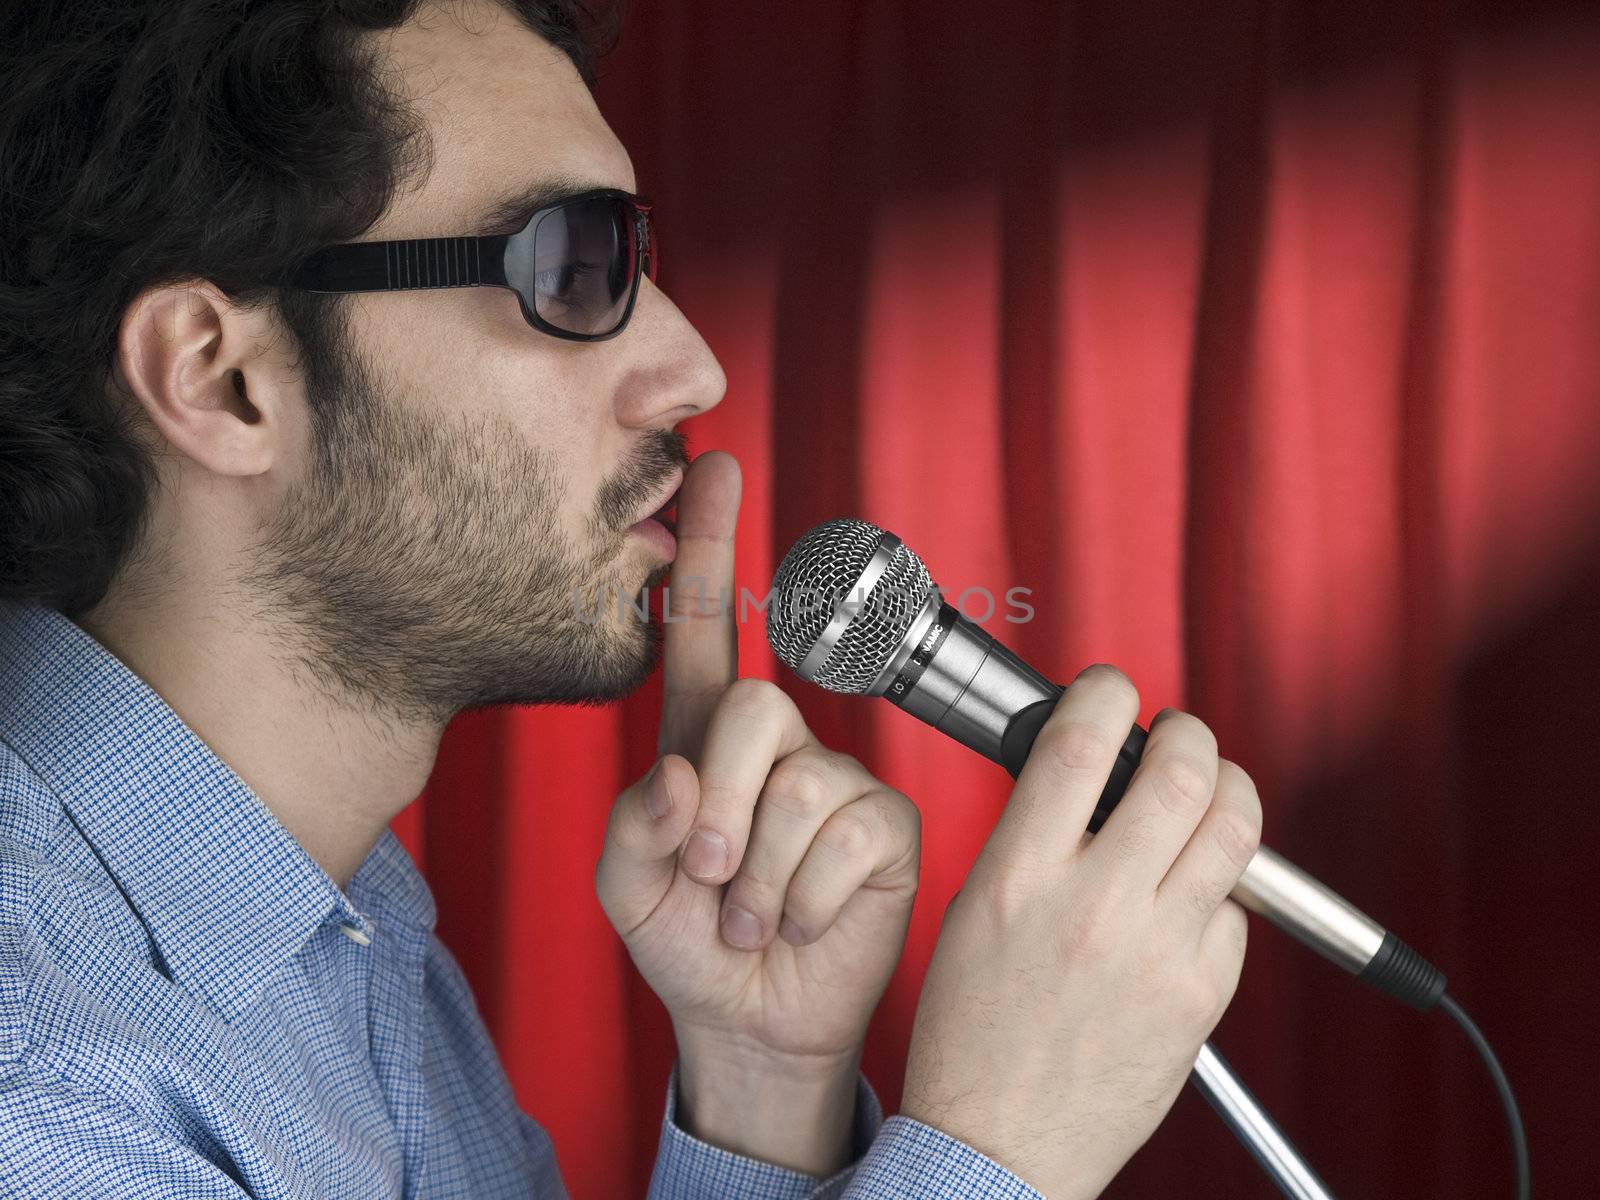 A young man with sunglasses hushing the audience on the mic.